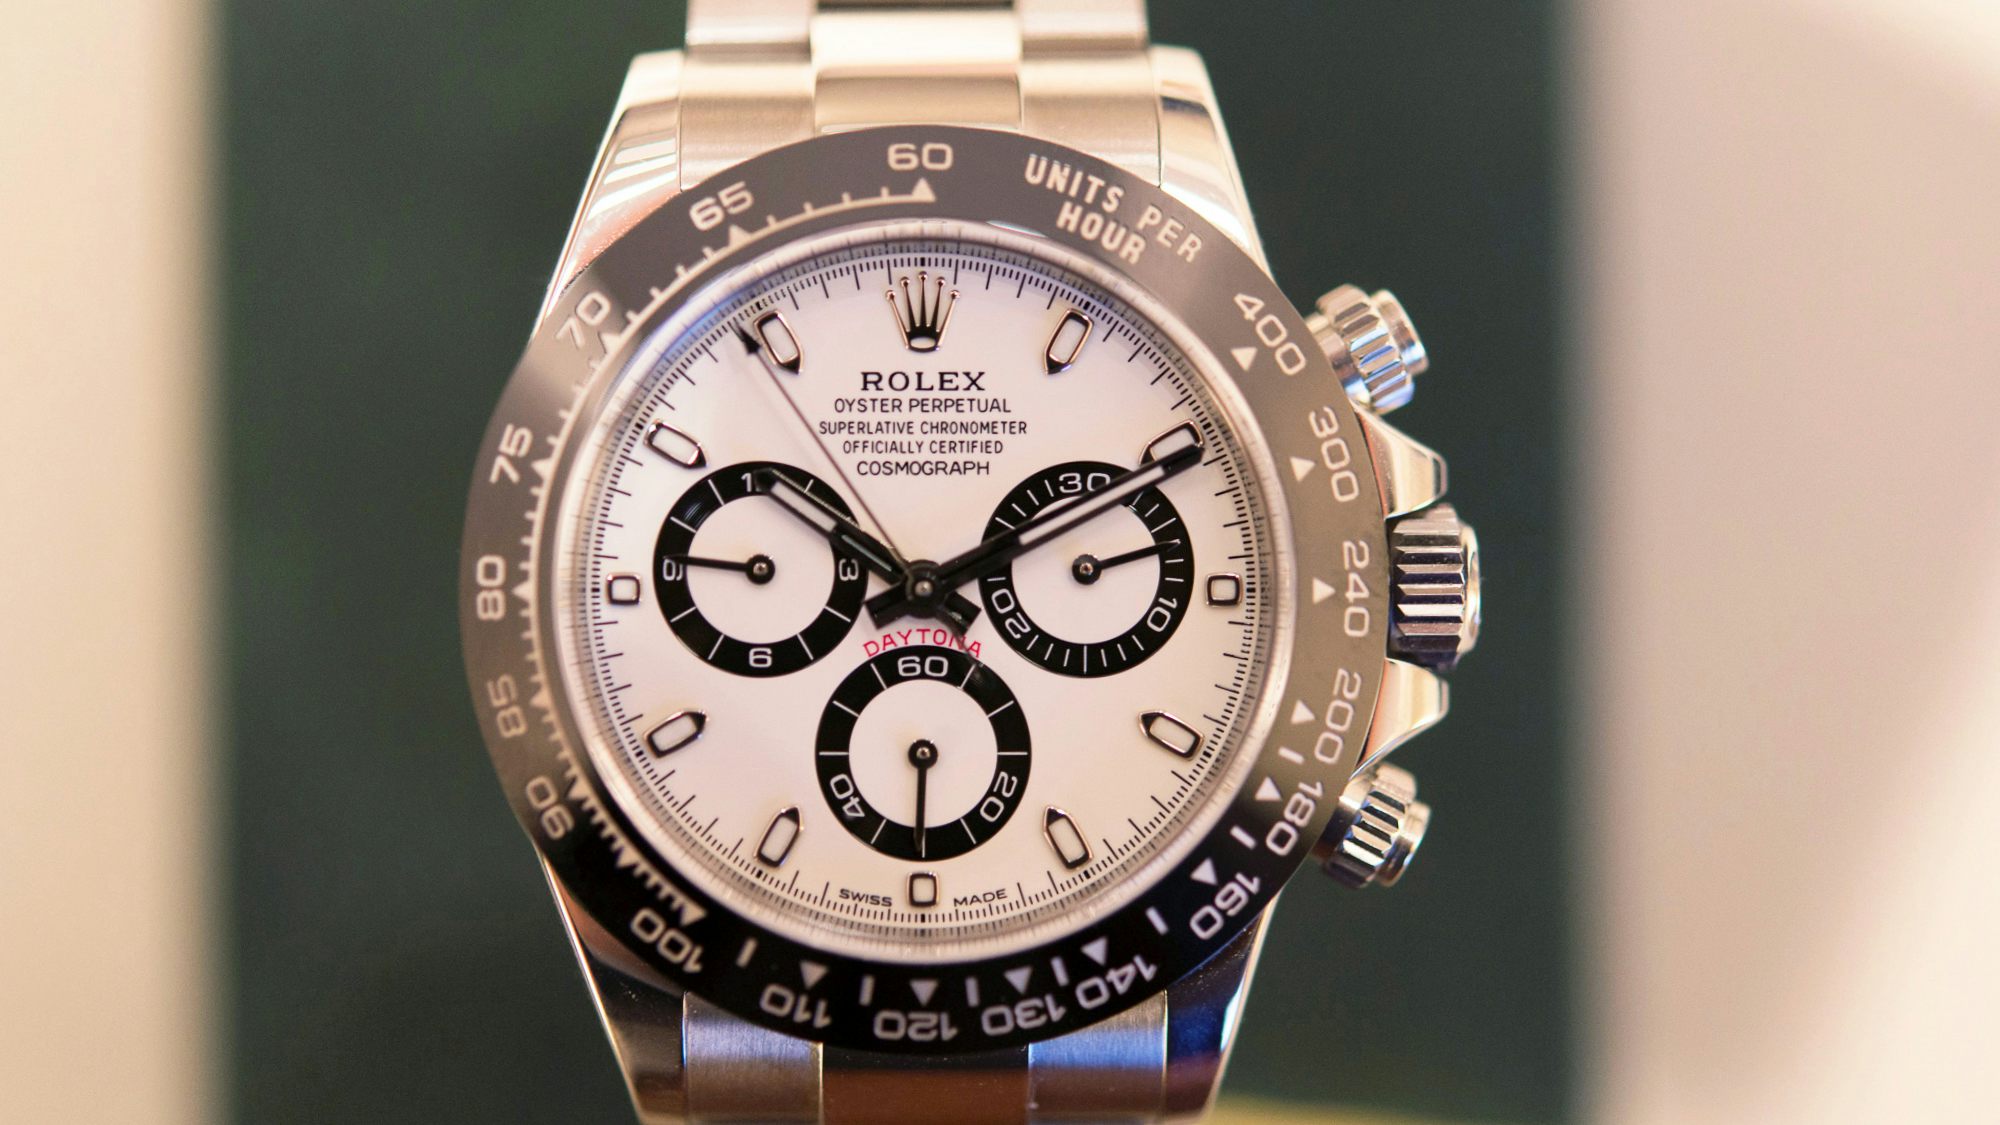 Hodinkee Of Editor: Rolex One Considered Letters To The Big - Why Isn\'t Three\'? \'The